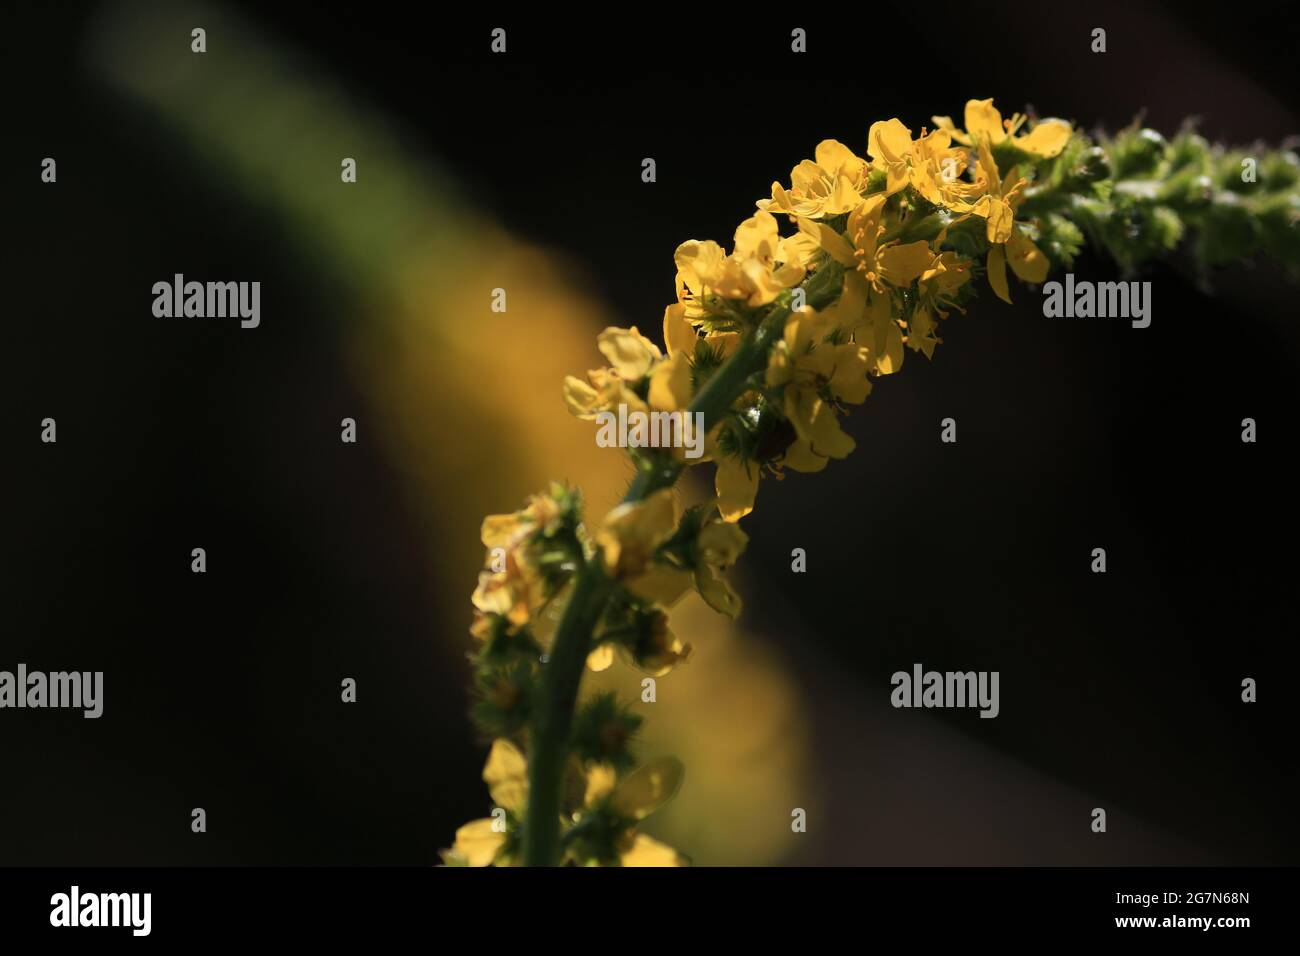 Agrimonia eupatoria, common agrimony. Yellow wildflowers close-up in sunlight on a black background outdoors. Yellow flower in a summer meadow. Stock Photo